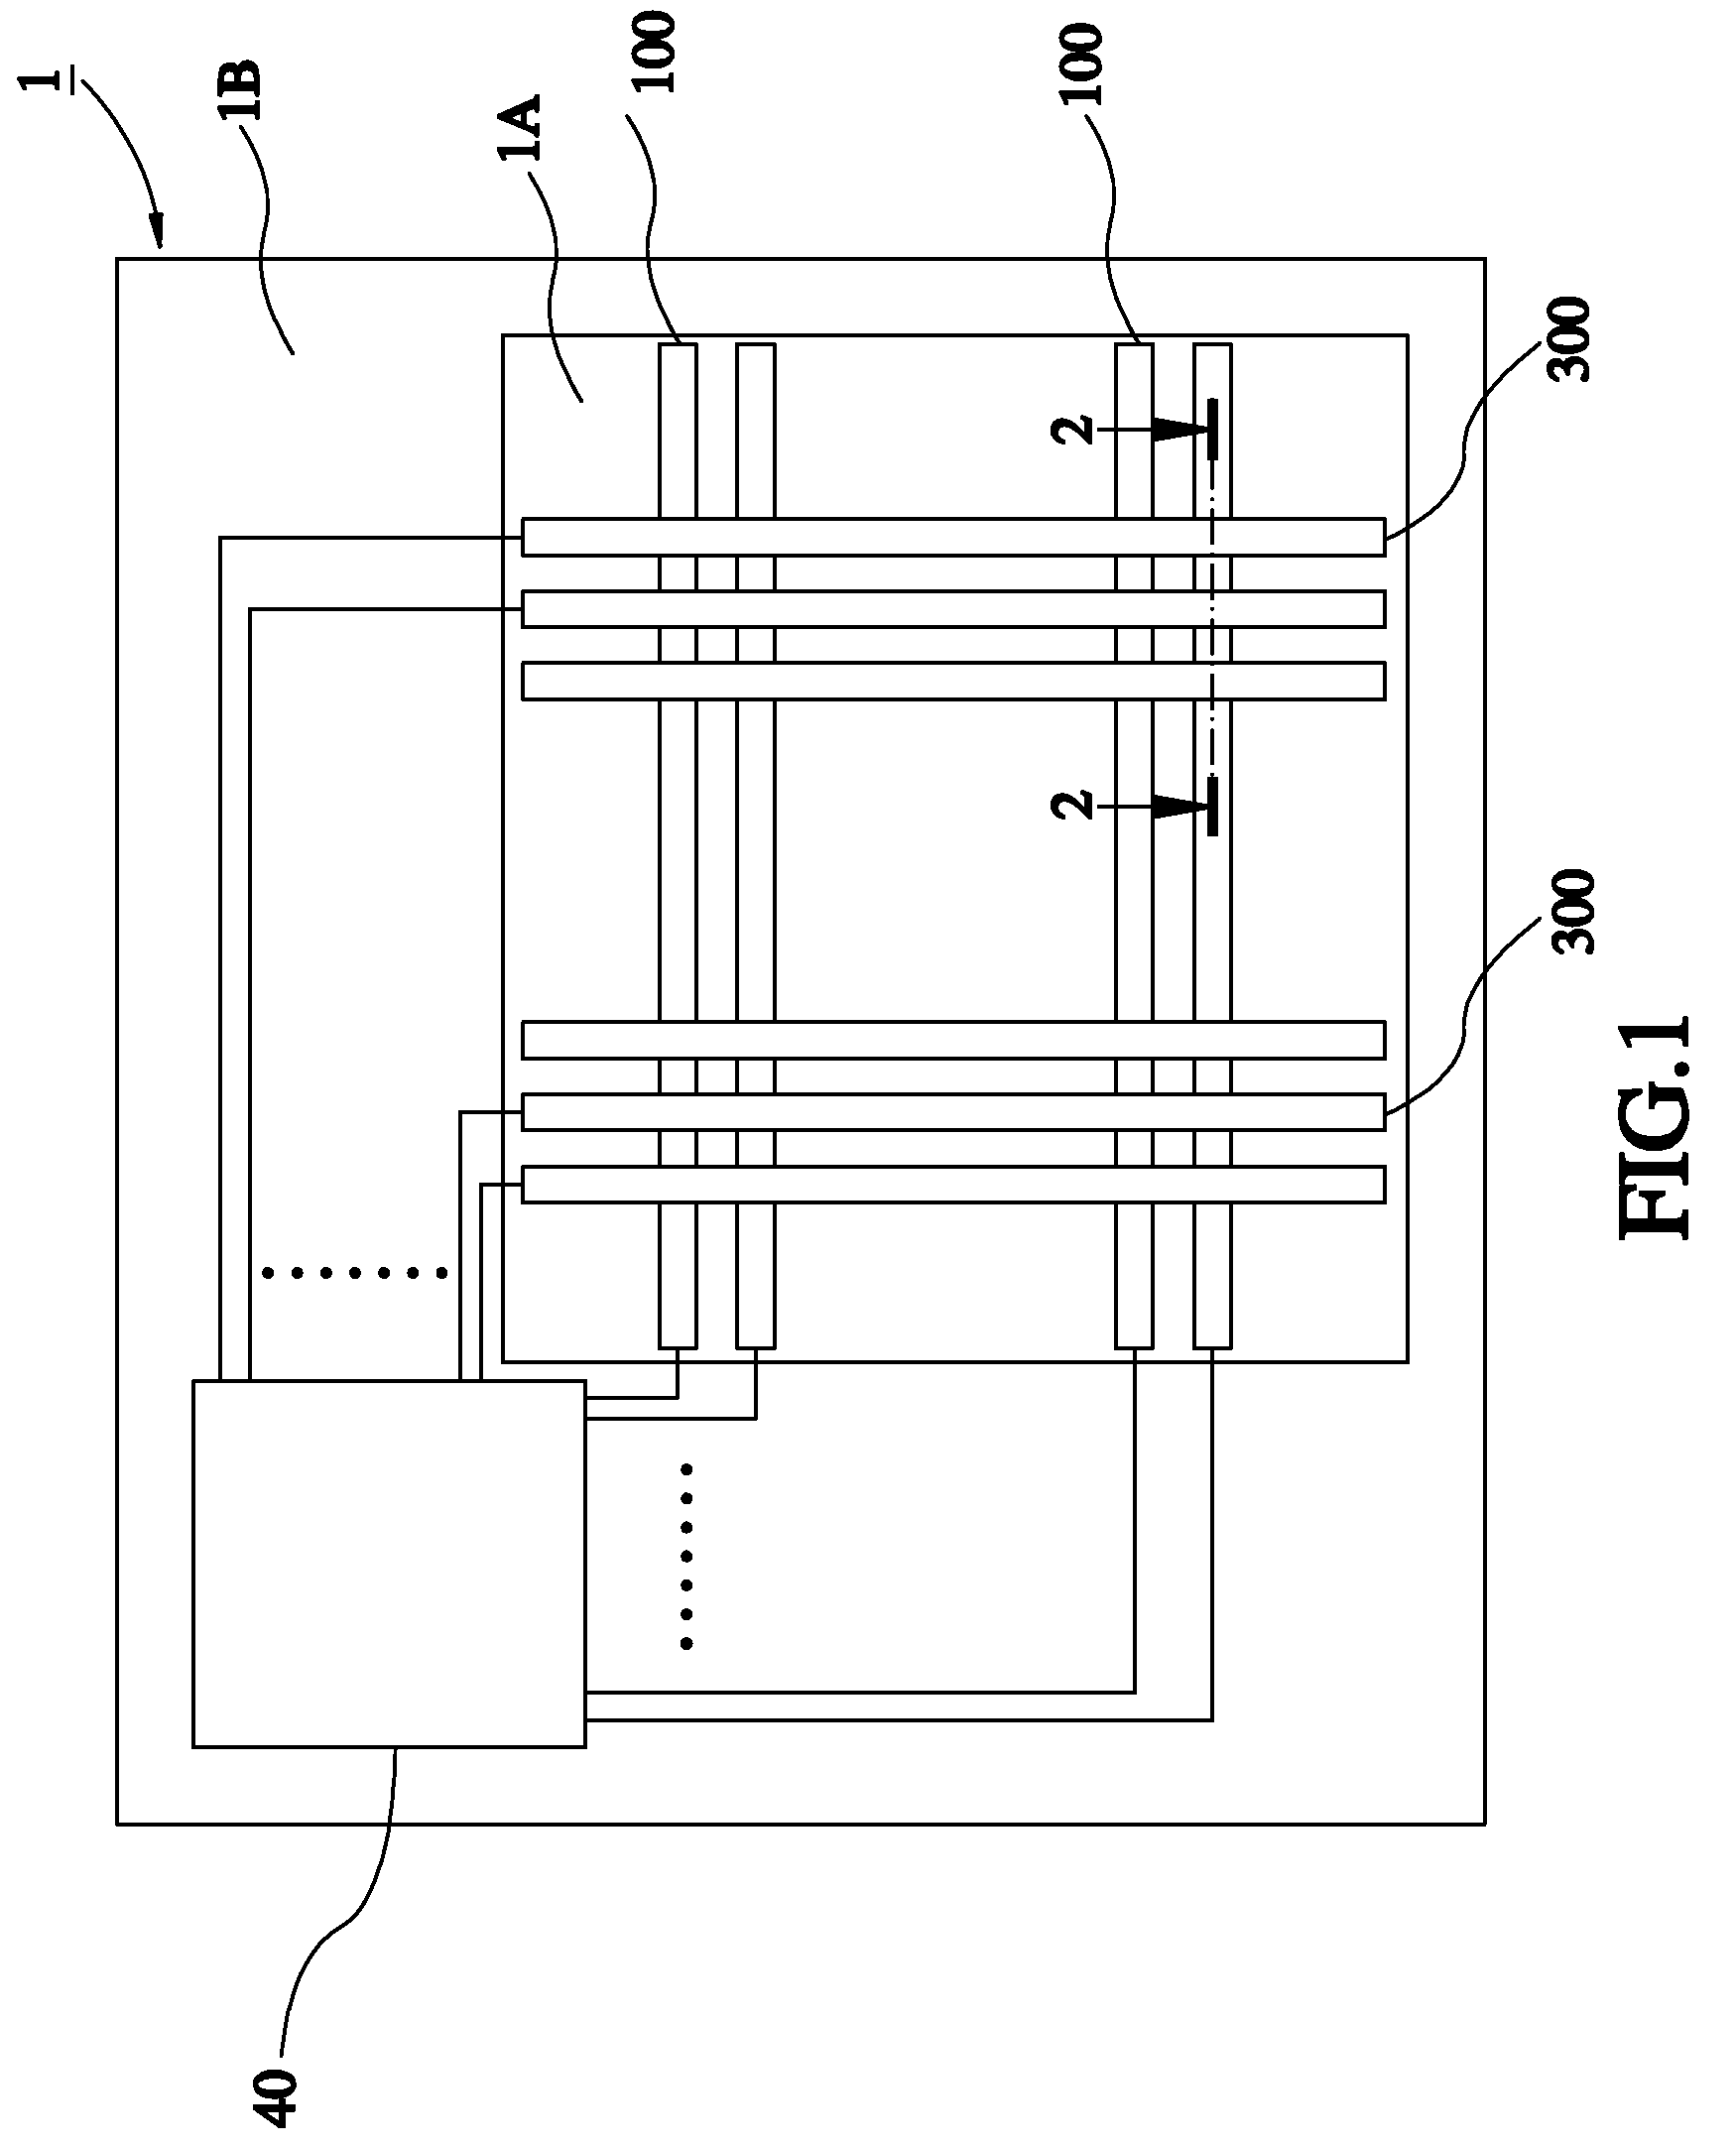 Multipoint sensing method for capacitive touch panel